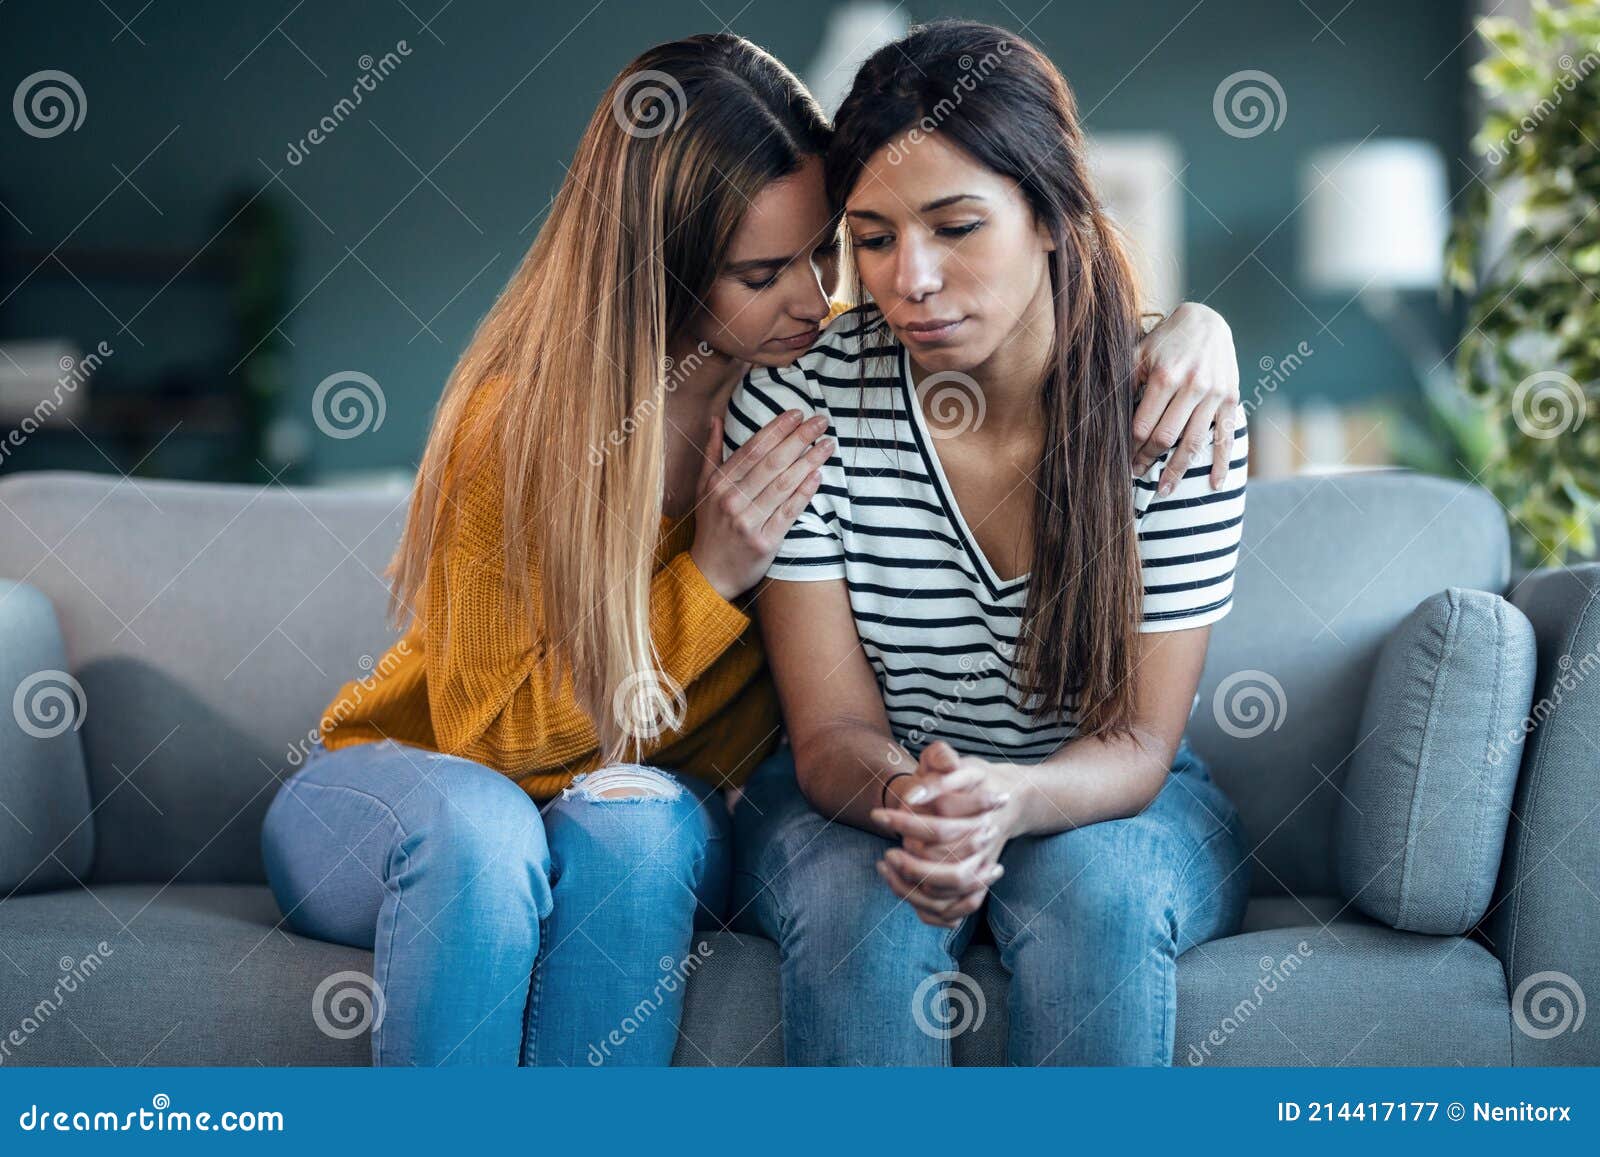 pretty young woman supporting and comforting her sad friend while sitting on the sofa at home